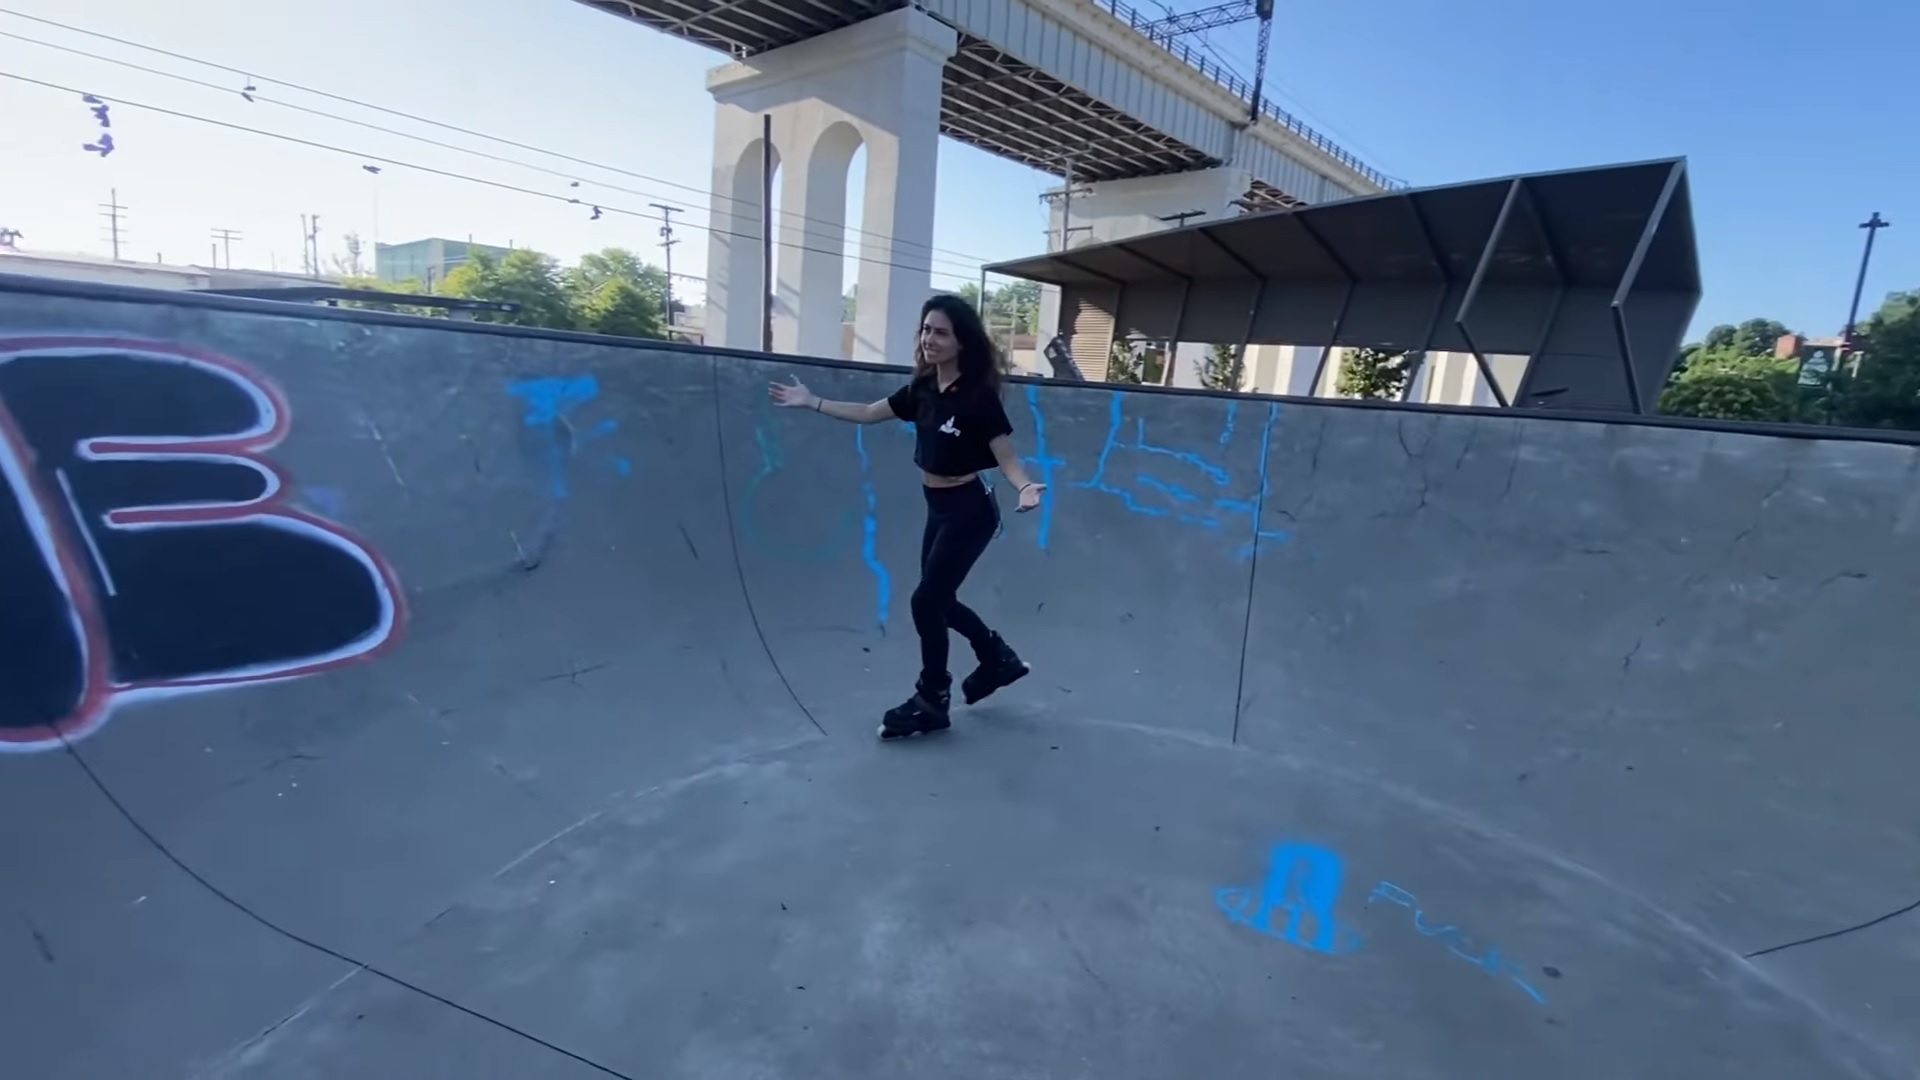 Flower She Rolls – How to skate a bowl One step at a time